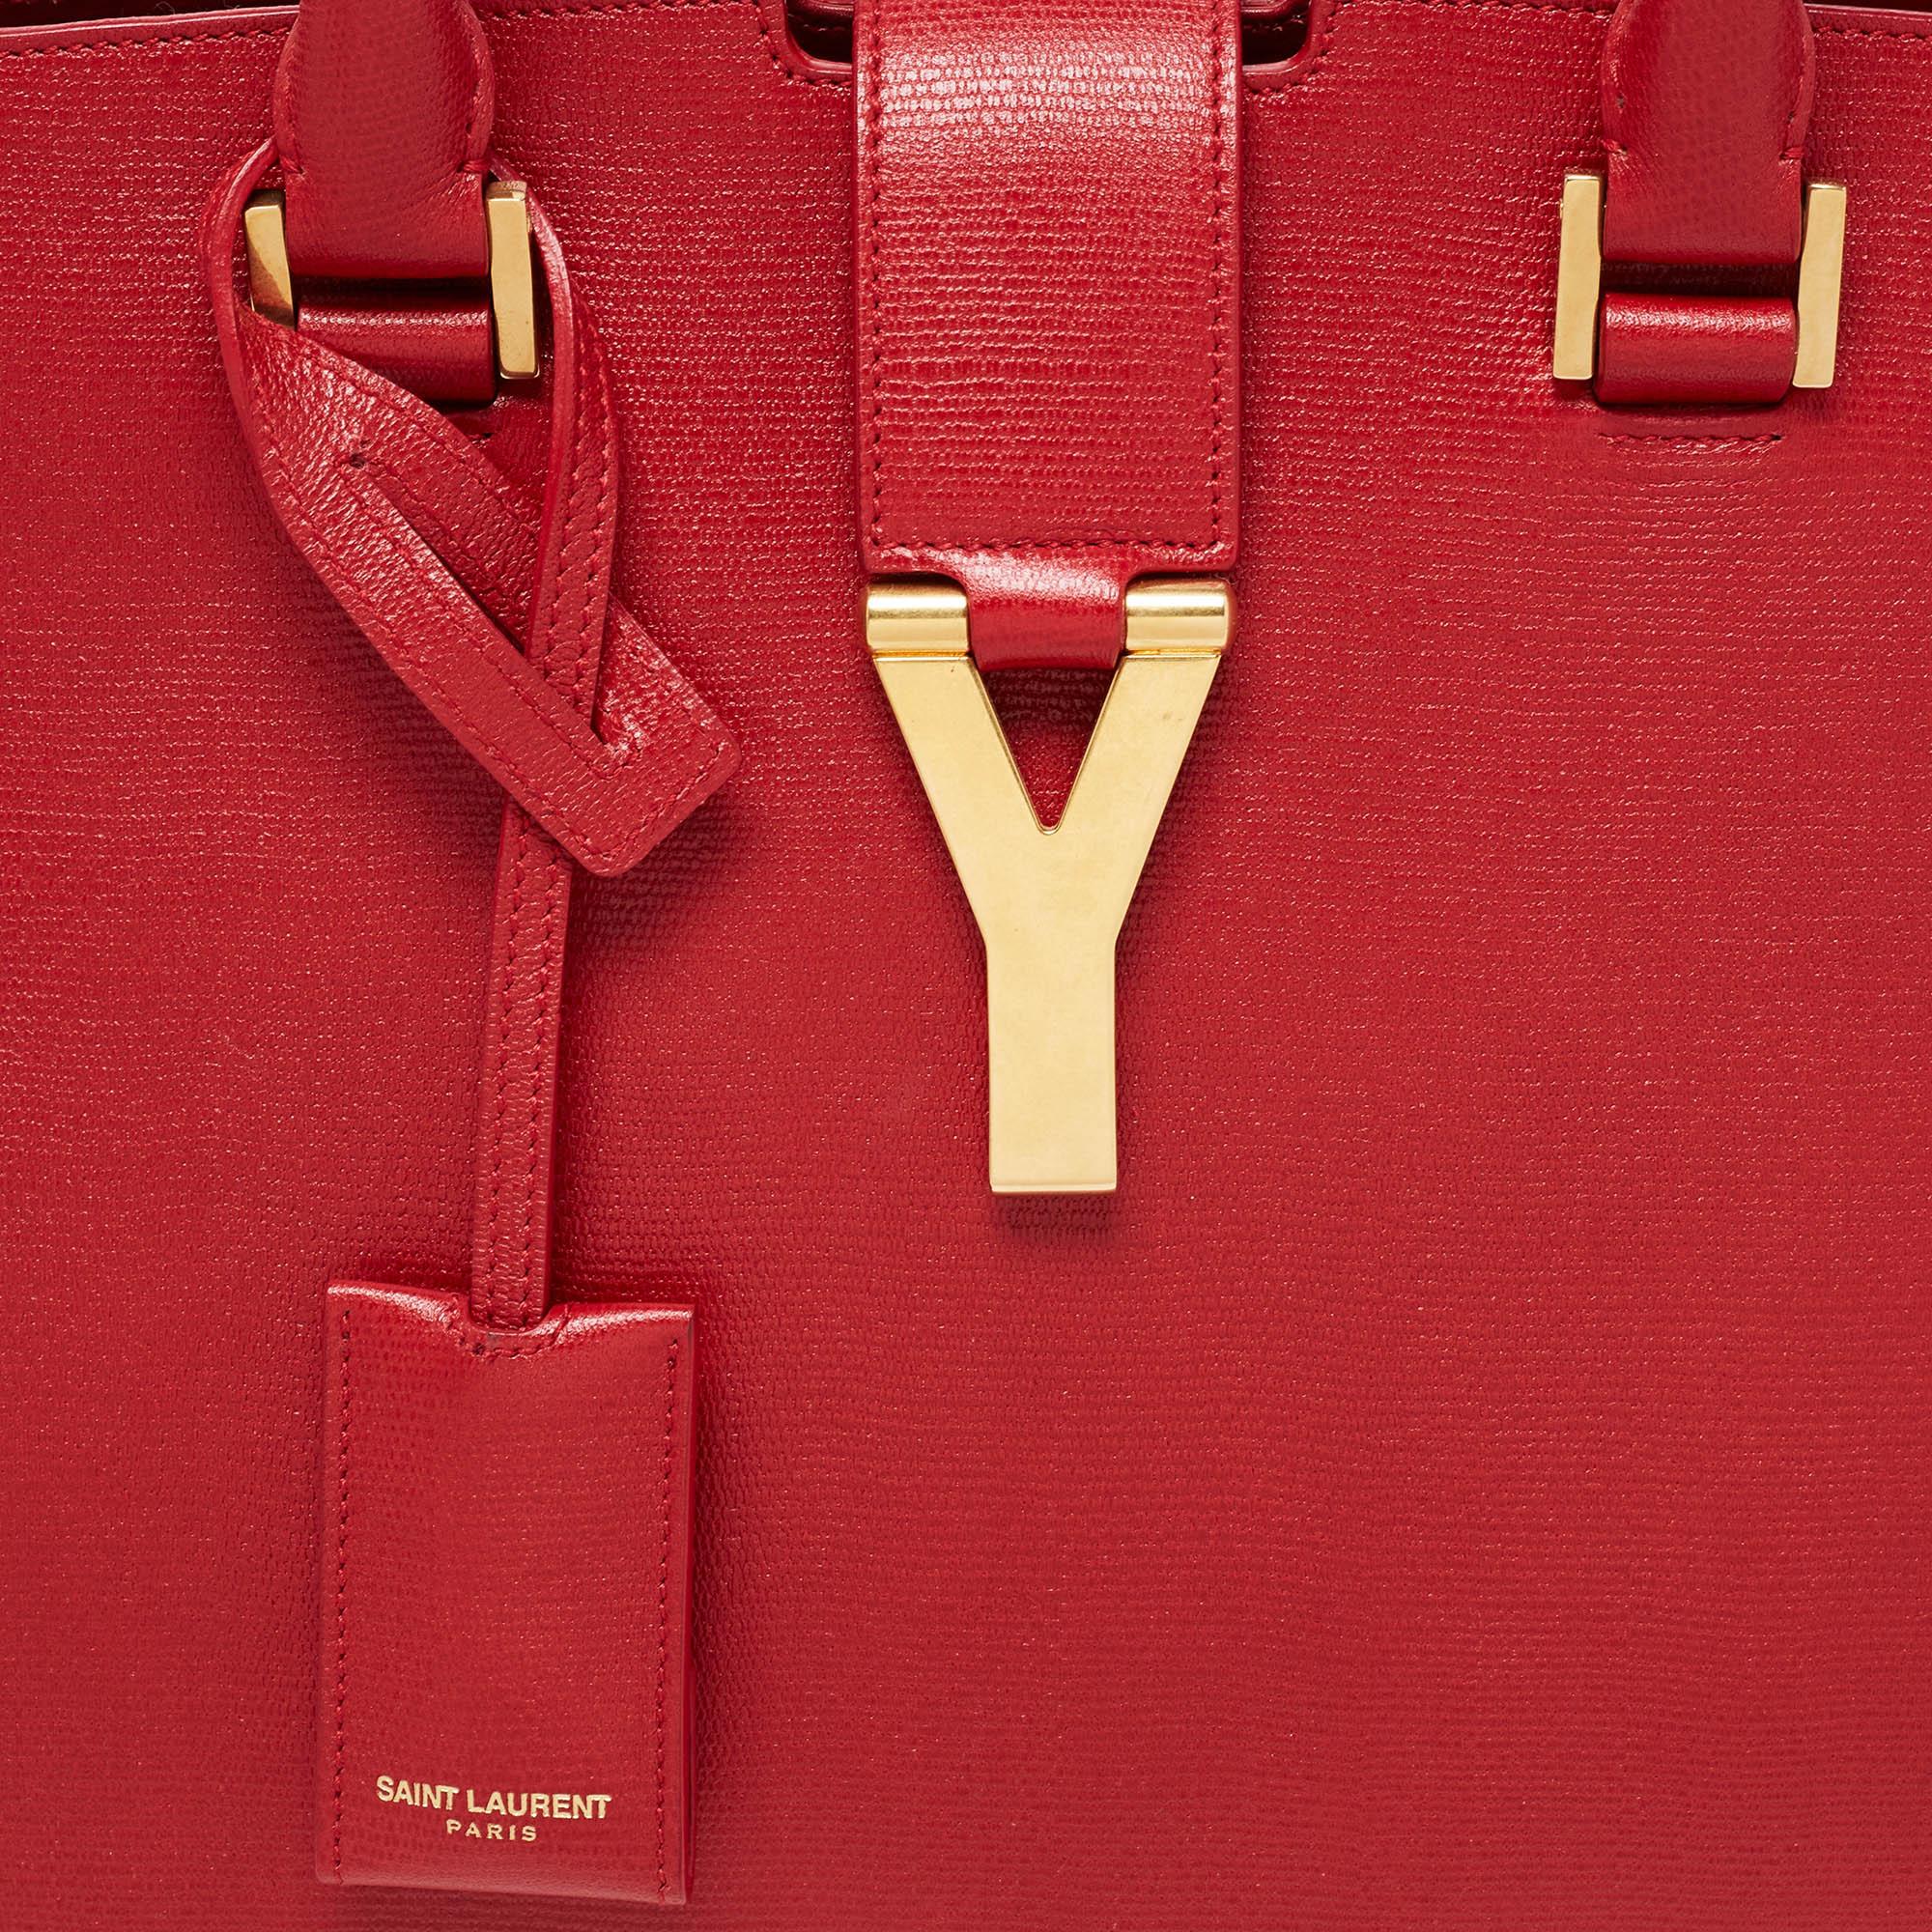 Yves Saint Laurent Red Leather Medium Cabas Chyc Tote 5